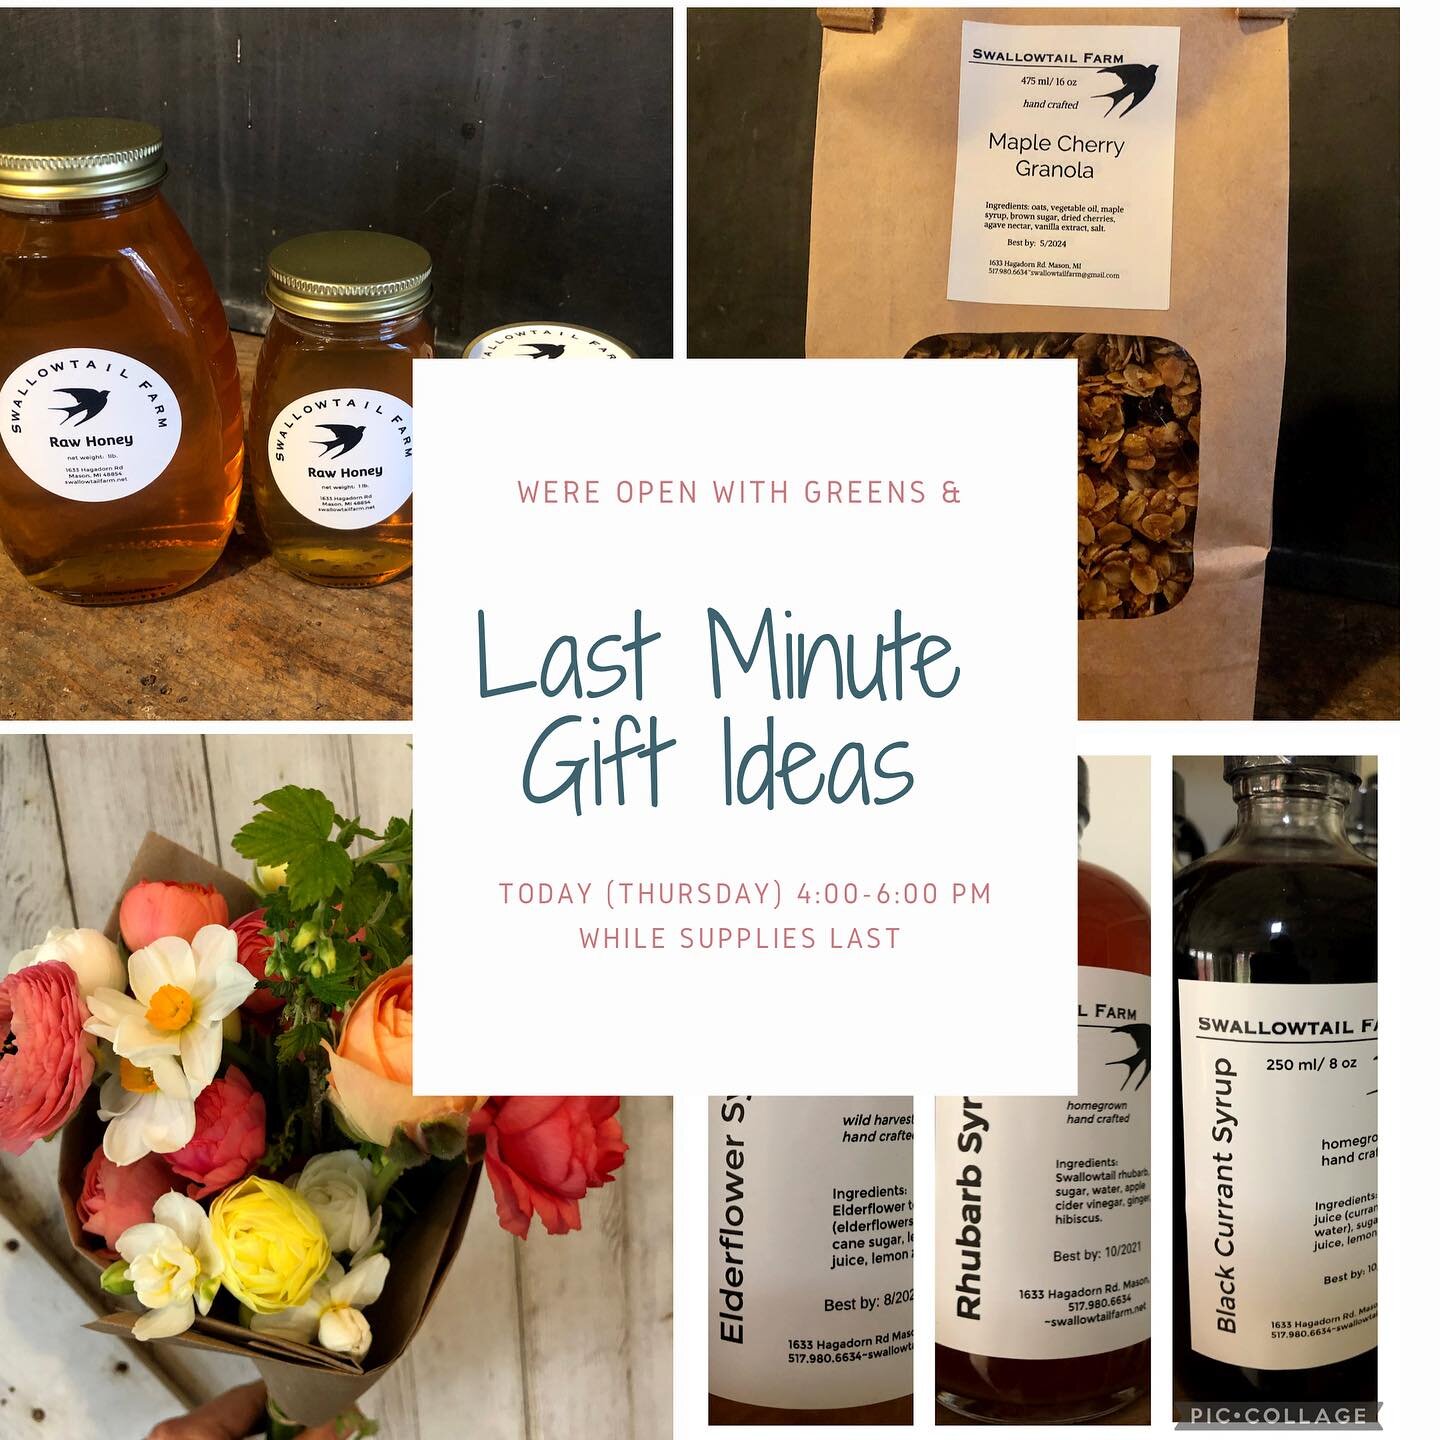 Tonight is the last time the farmstand will be open until Spring 2024. 

We are loaded with greens and have last minute gift ideas that avoid the crowds. 

Stop in for honey, granola, syrups great for foodies and cocktail enthusiasts 

Spring flower 